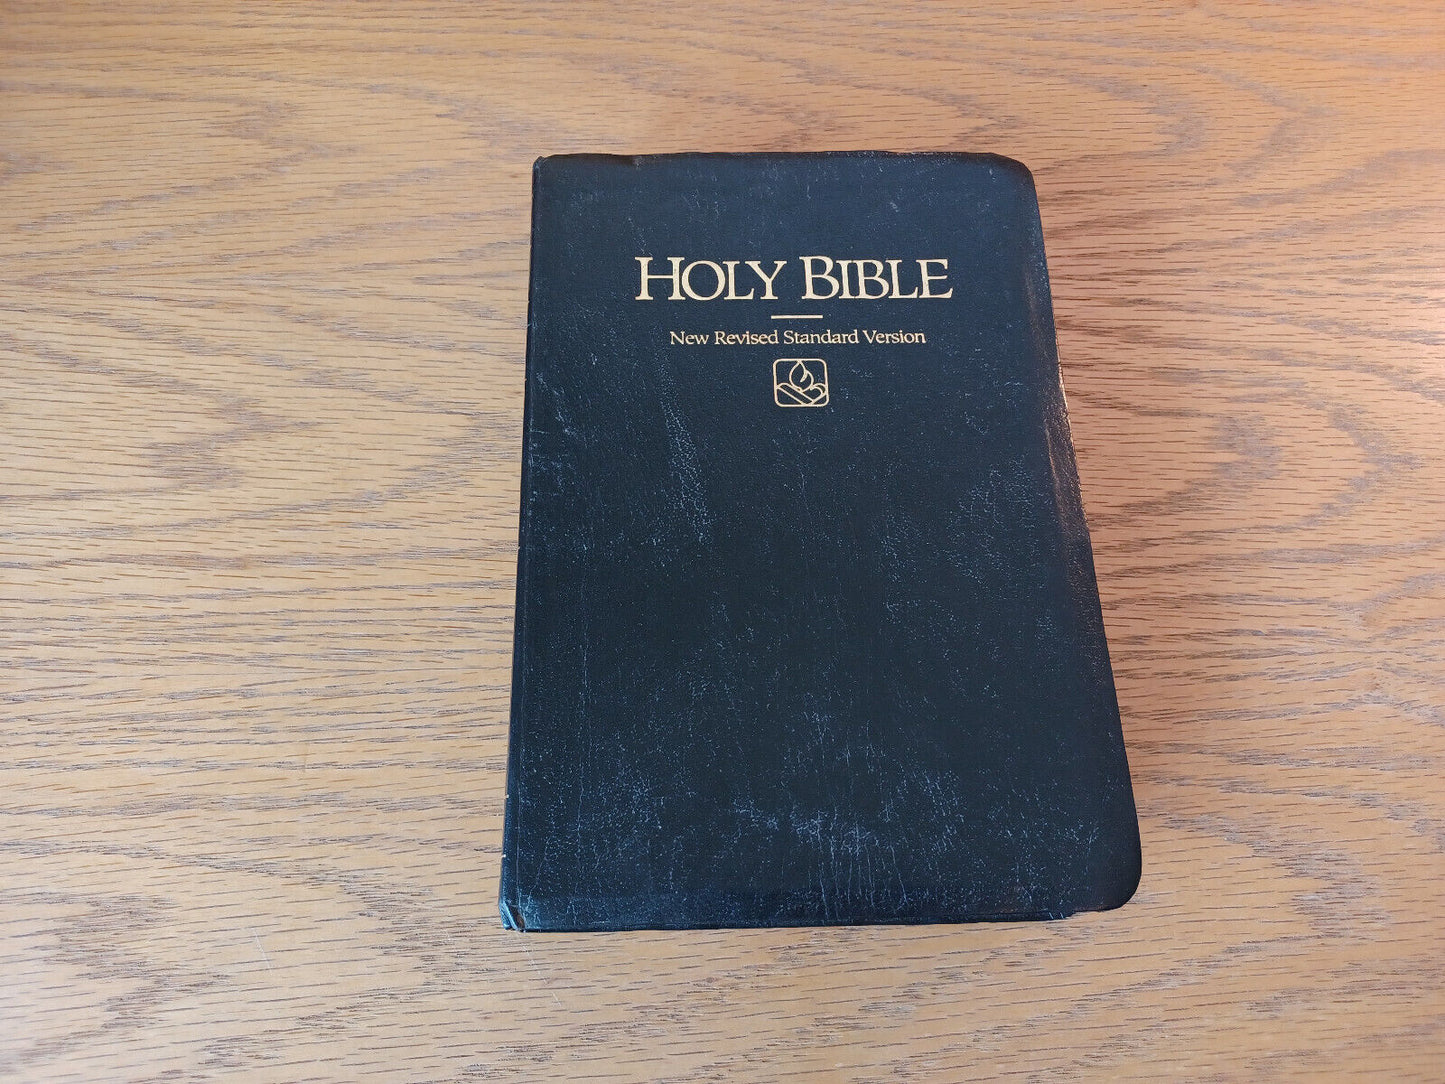 Holy Bible New Revised Standard Version 1990 Study Helps Augsburg Fortress B